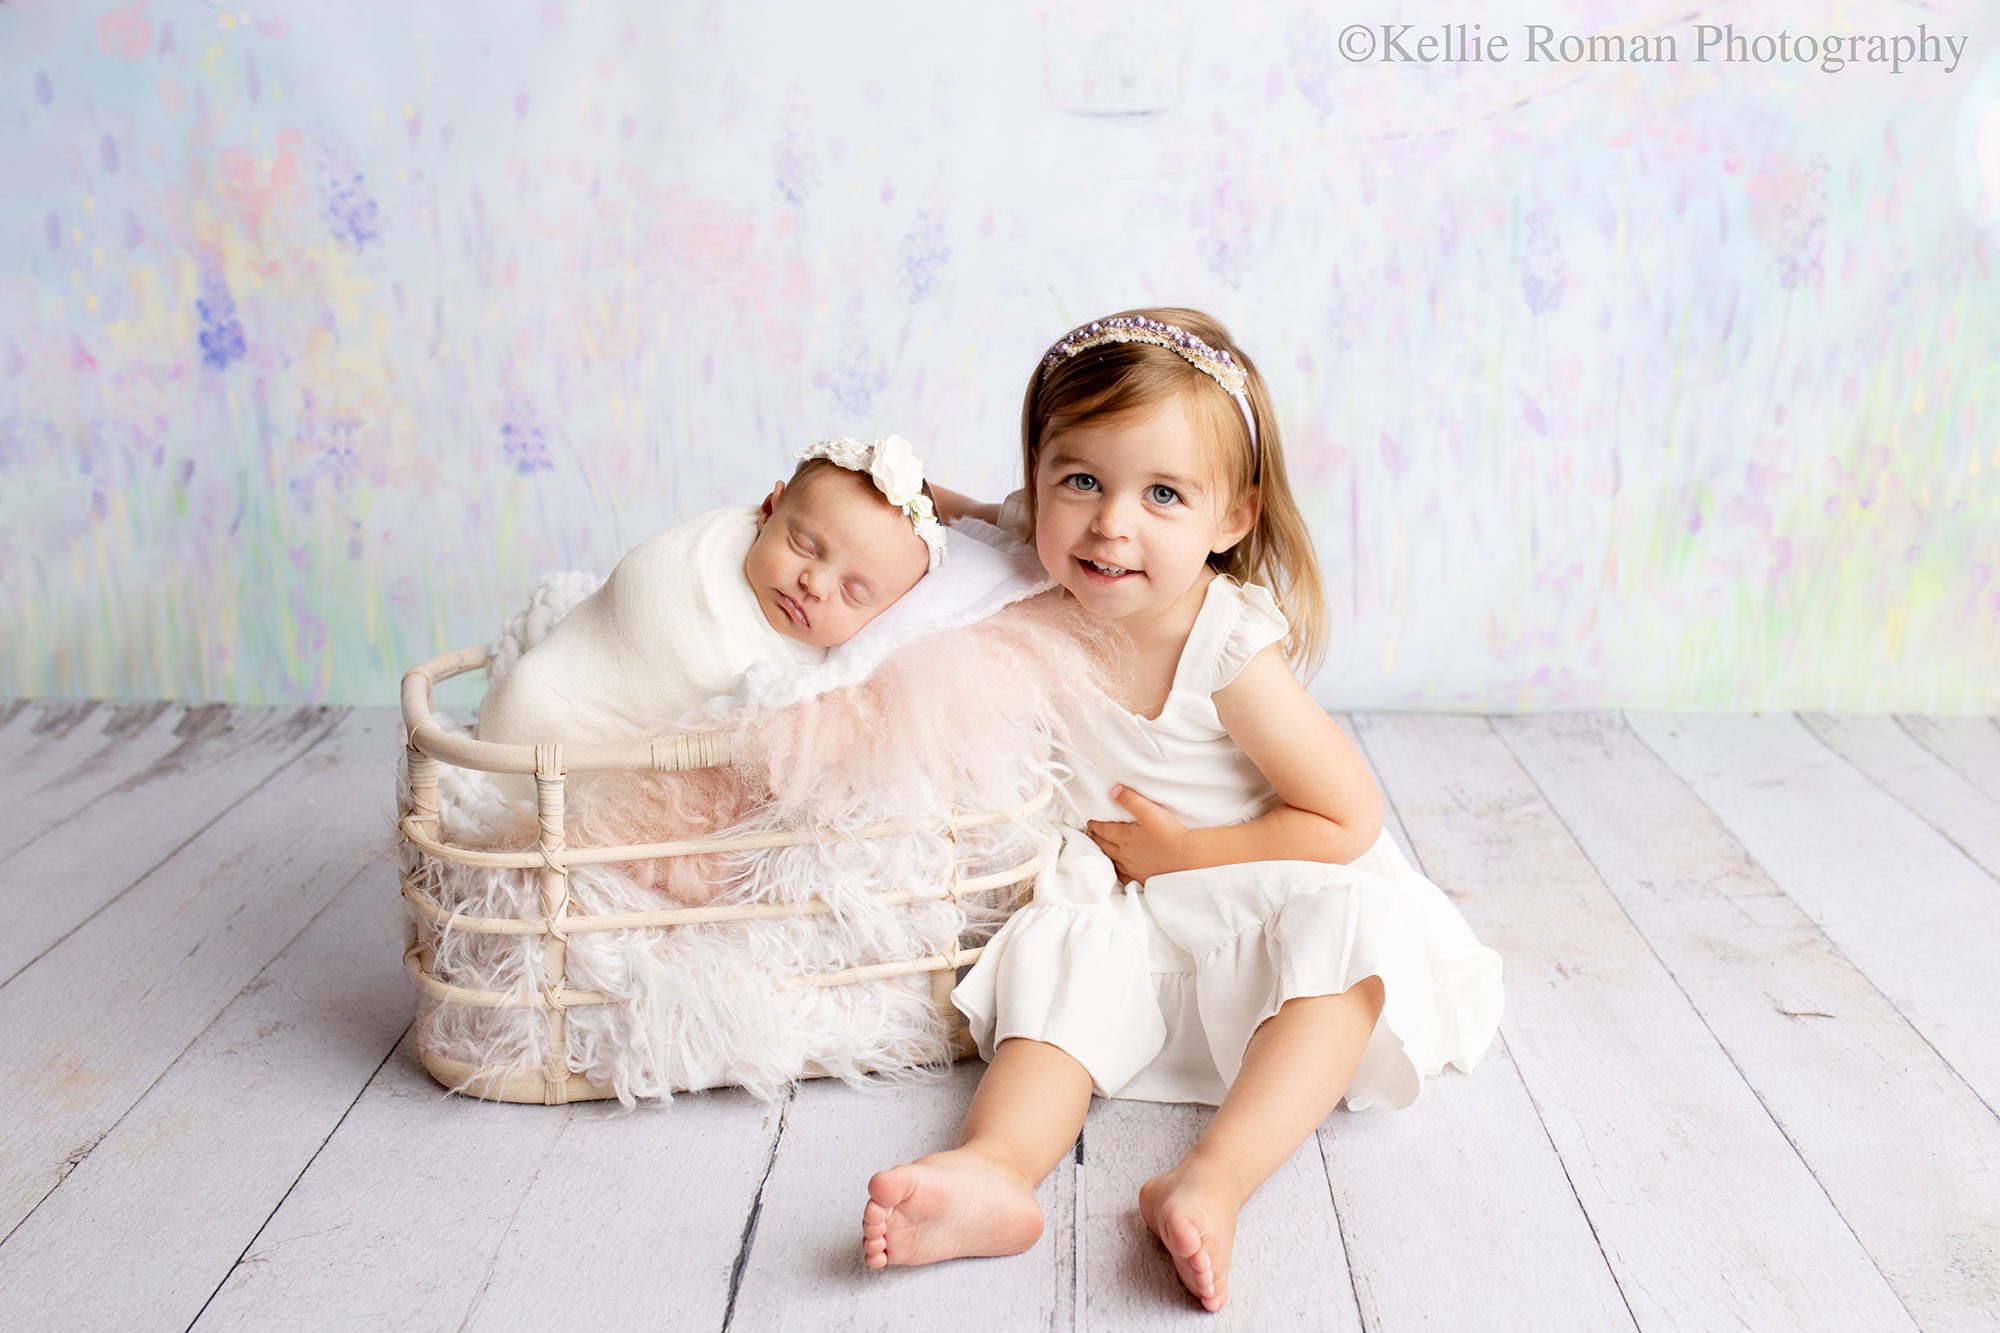 adorable newborn sister. a newborn baby girl is wrapped in a cream fabric and sleeping in a basket with pink and white furs. toddler big sister who is wearing white dress is sitting next to the basket. backdrop is shade for purple 